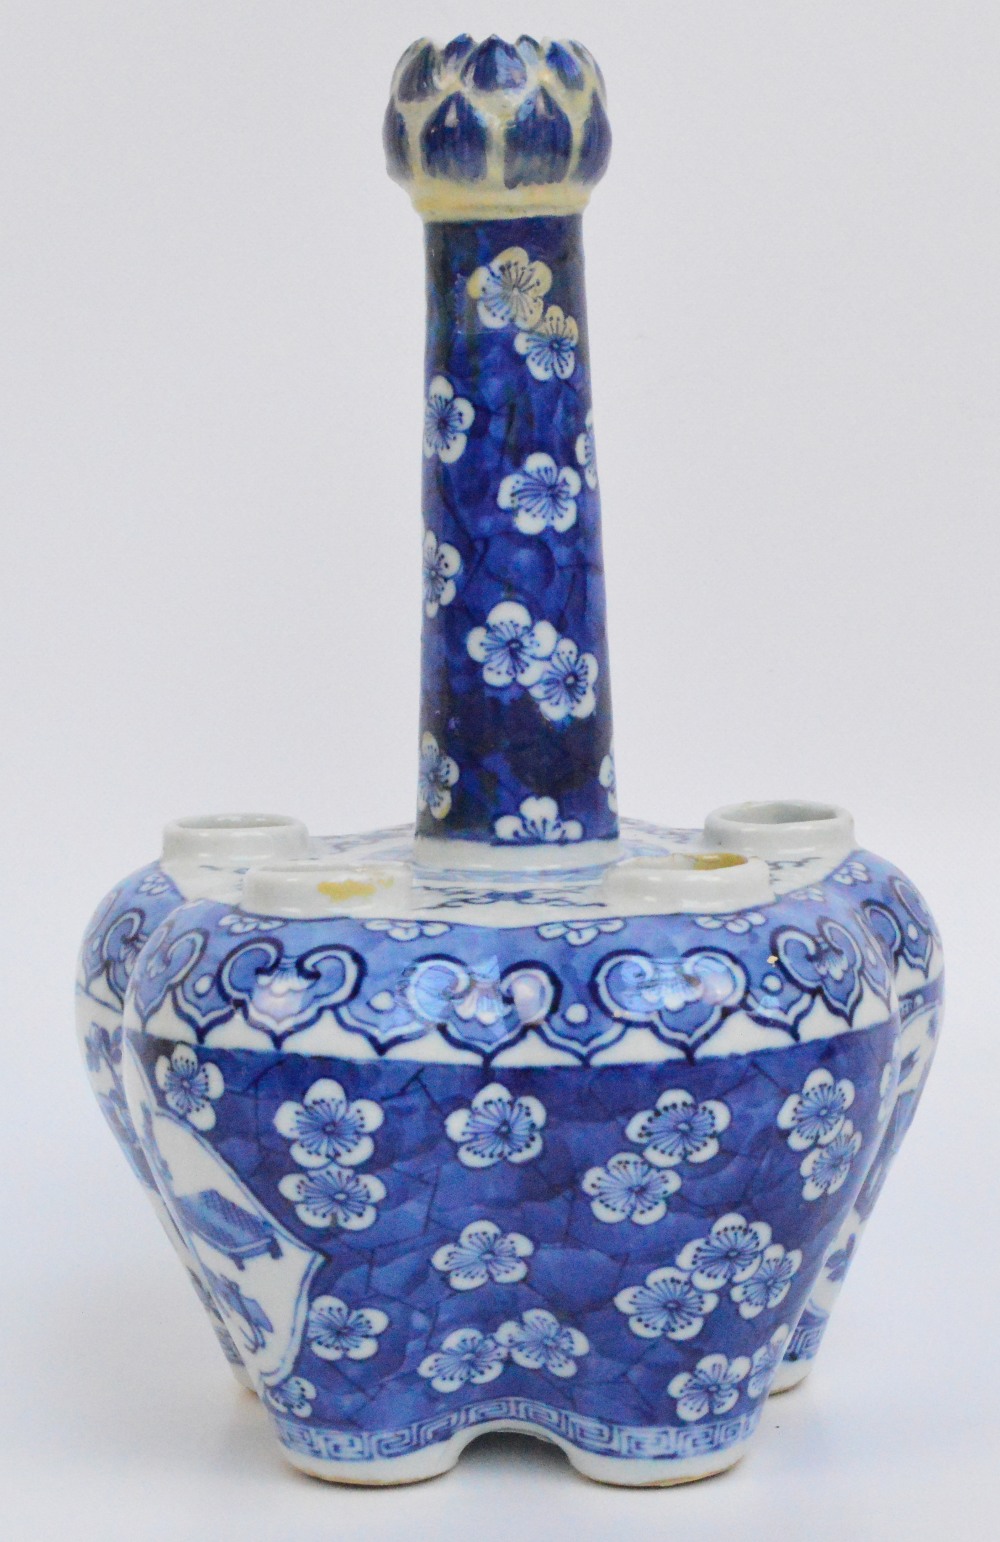 A 19th century Chinese tulip vase painted in underglaze blue with two opposing panels depicting a - Image 2 of 5